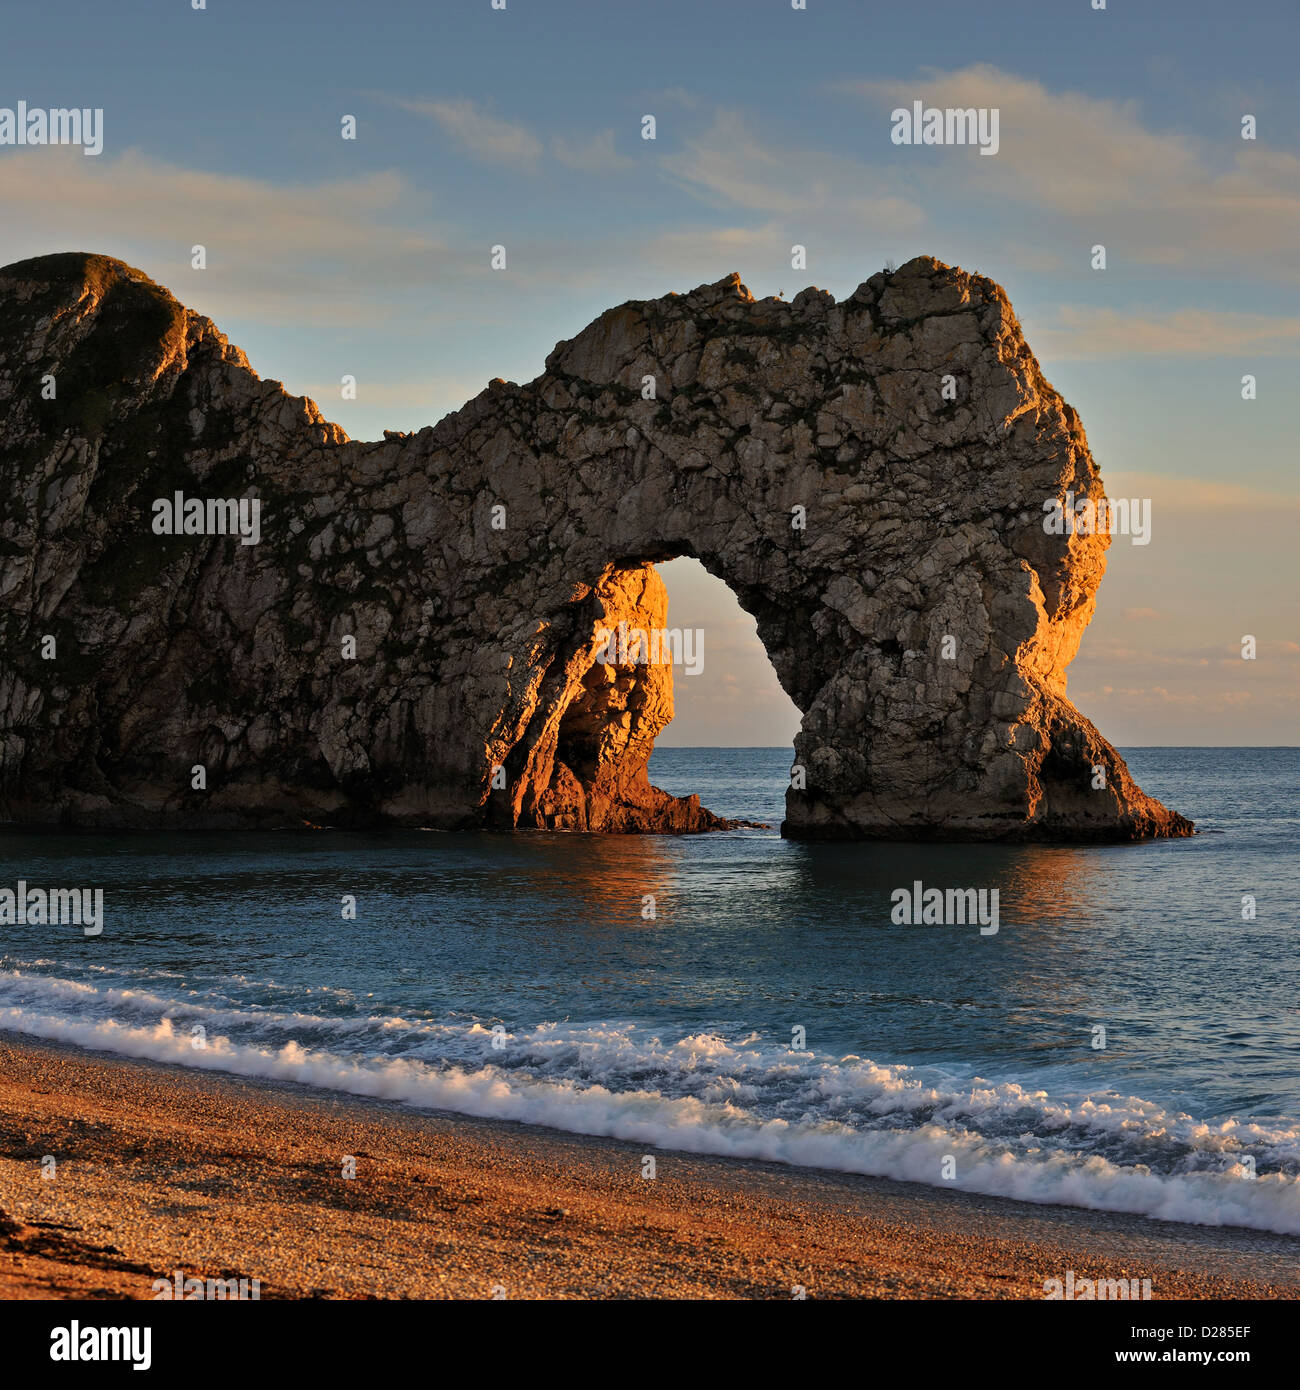 Durdle Door, a natural limestone arch at sunset along the Jurassic Coast near West Lulworth in Dorset, southern England, UK Stock Photo